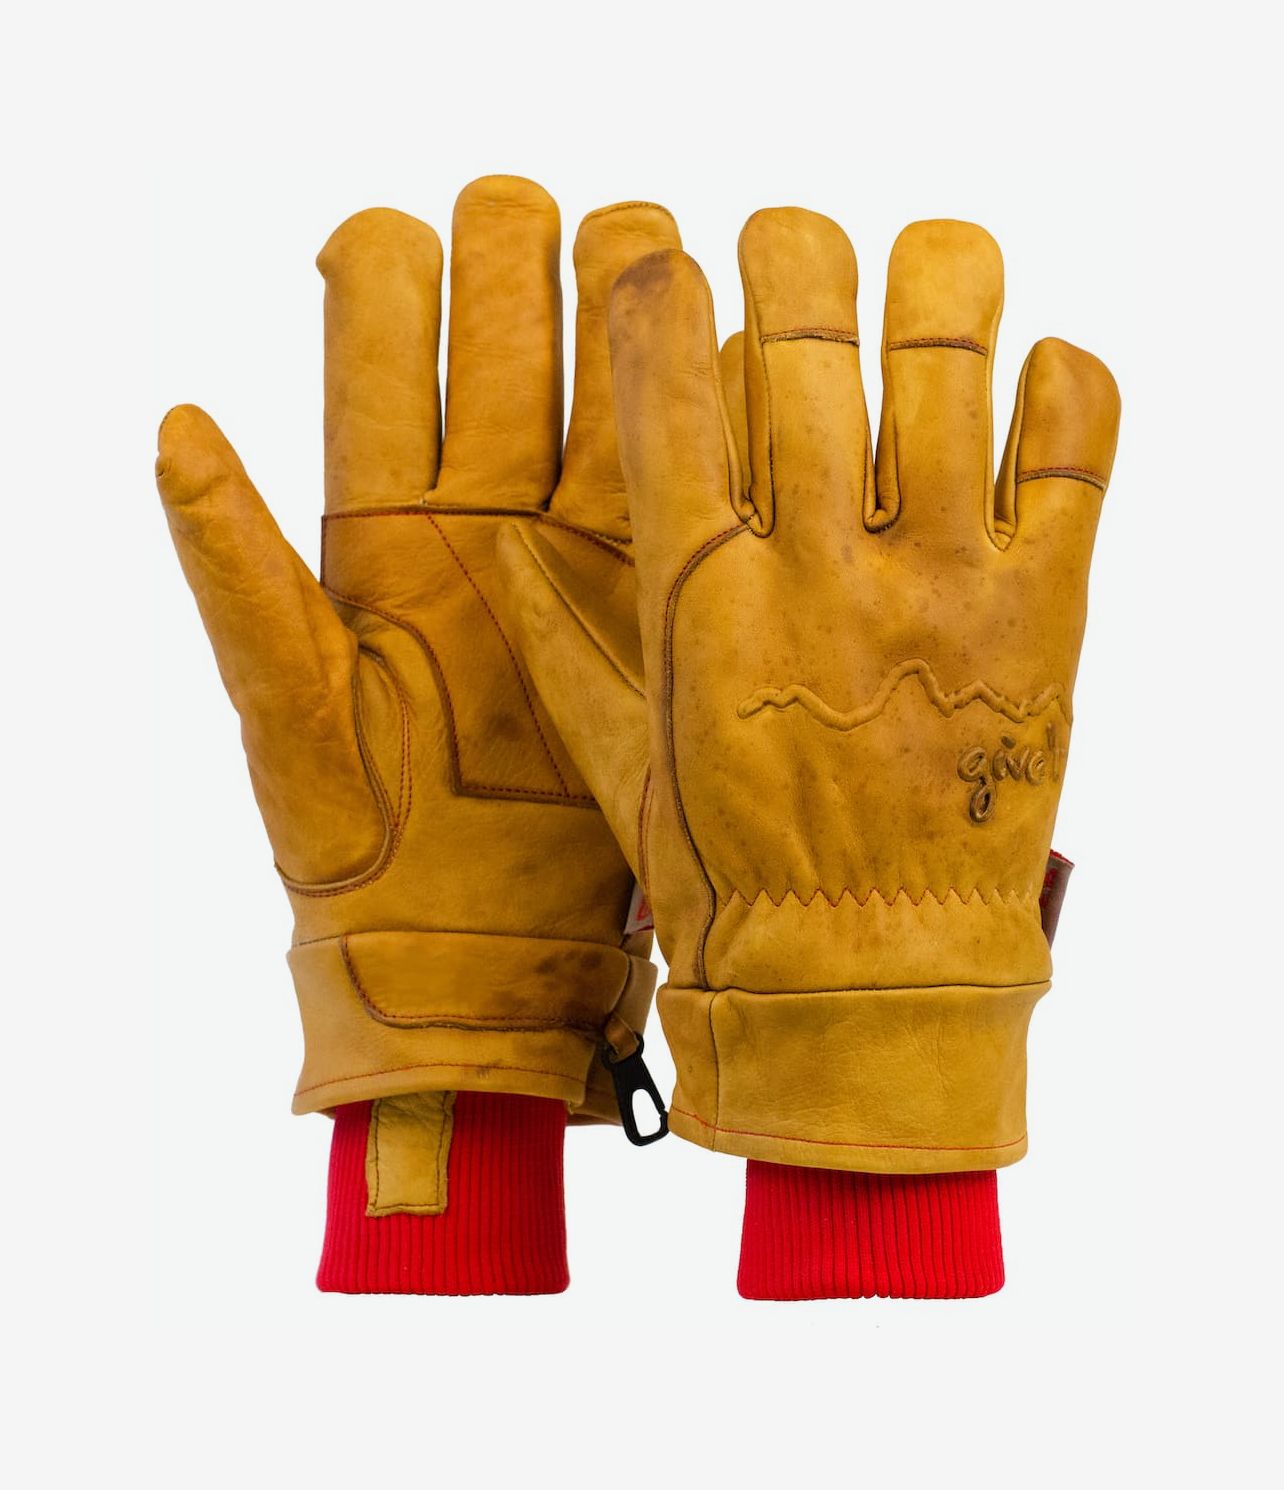 Give'r Lightweight Gloves Review 2019